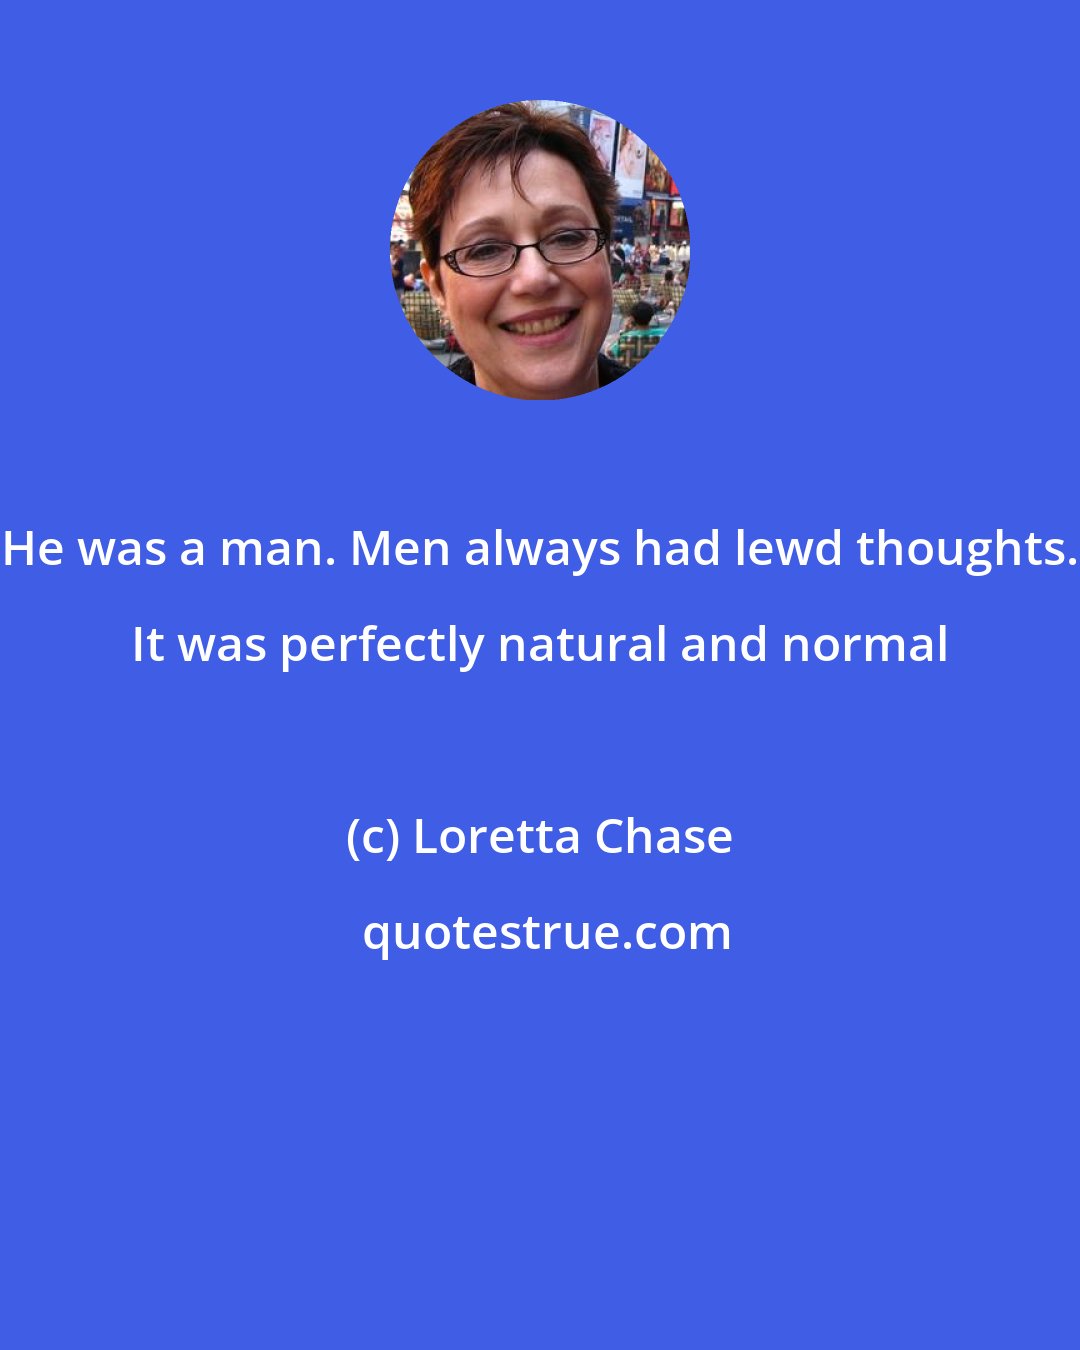 Loretta Chase: He was a man. Men always had lewd thoughts. It was perfectly natural and normal